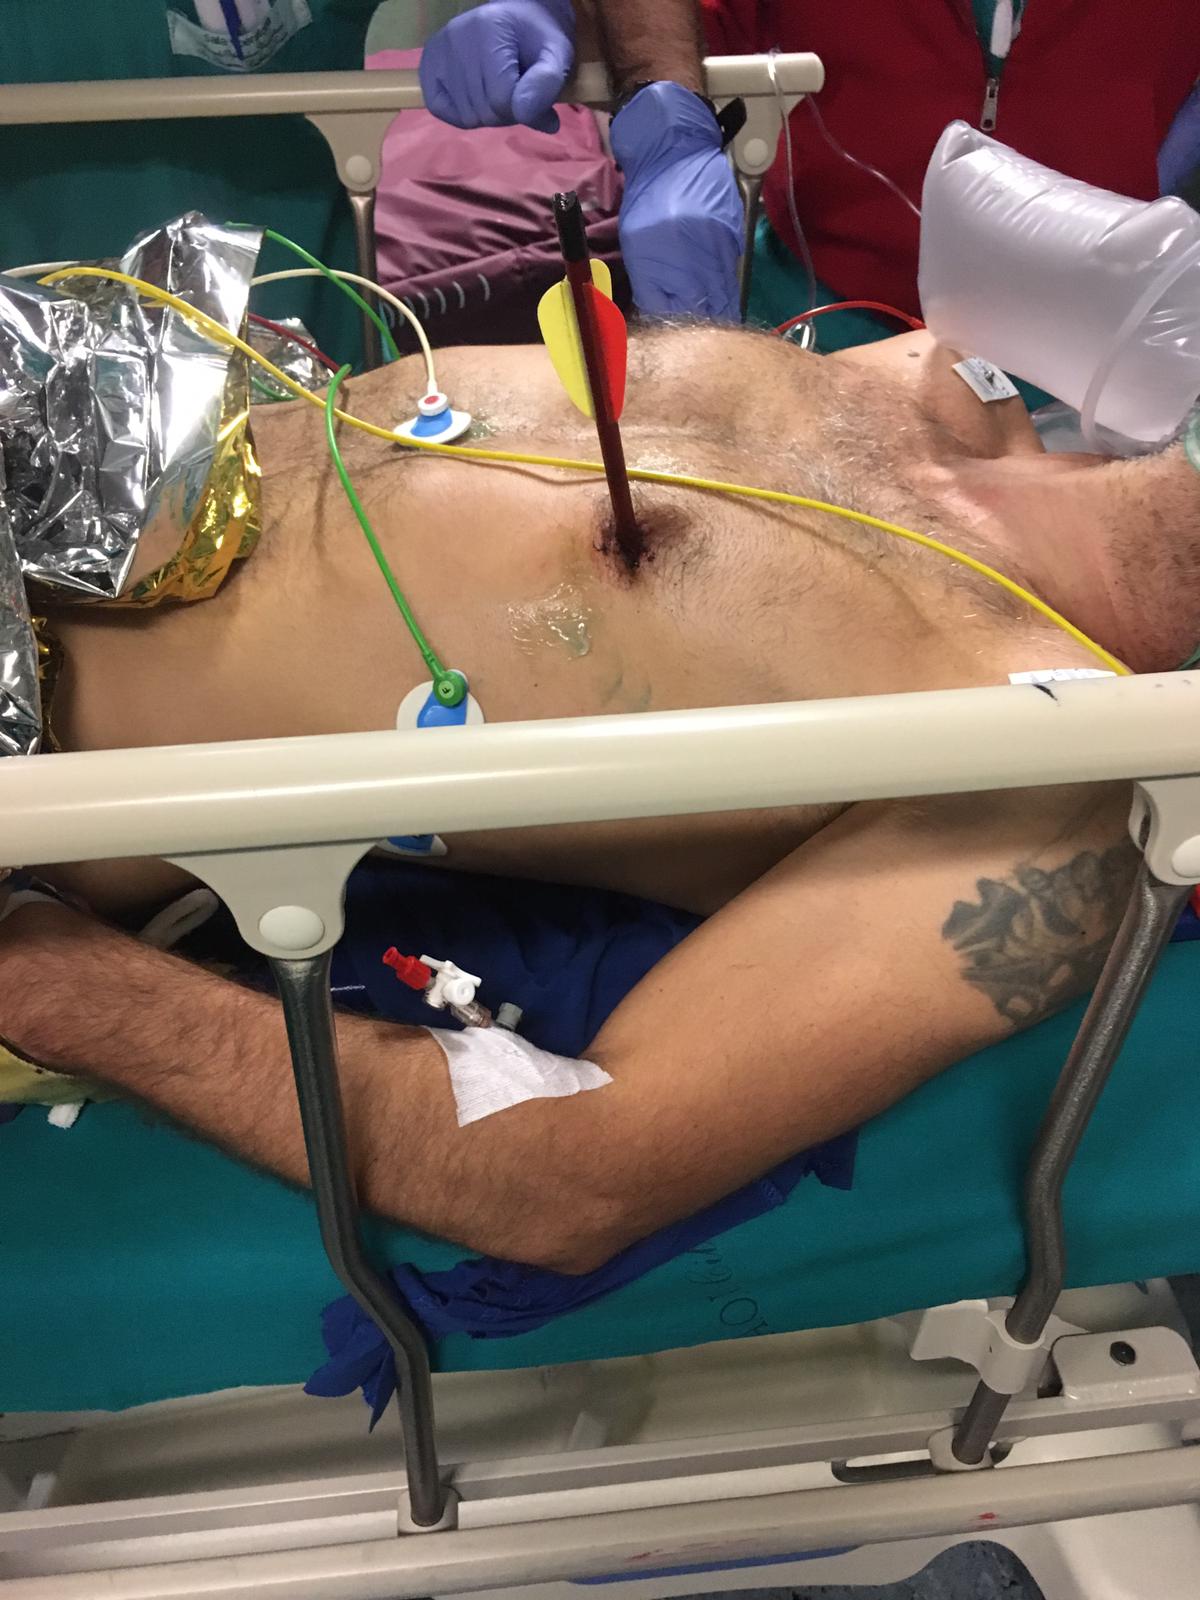 PHOTO: An Italian man survived surgery in a Turin, Italy hospital to remove an arrow in his chest that had punctured his heart and lung.